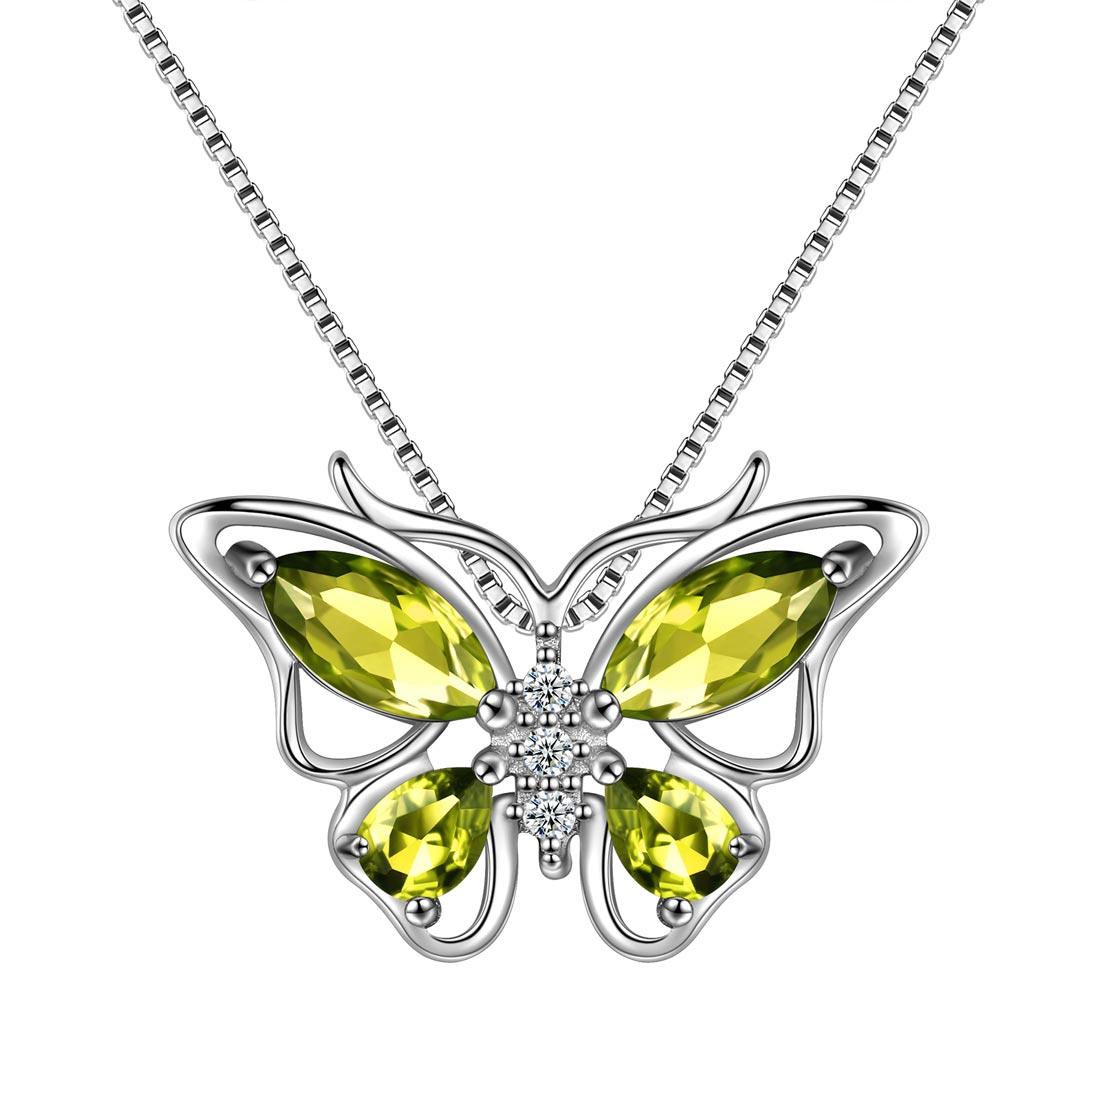 Butterfly Pendant Necklace Birthstone August Peridot - Necklaces - Aurora Tears